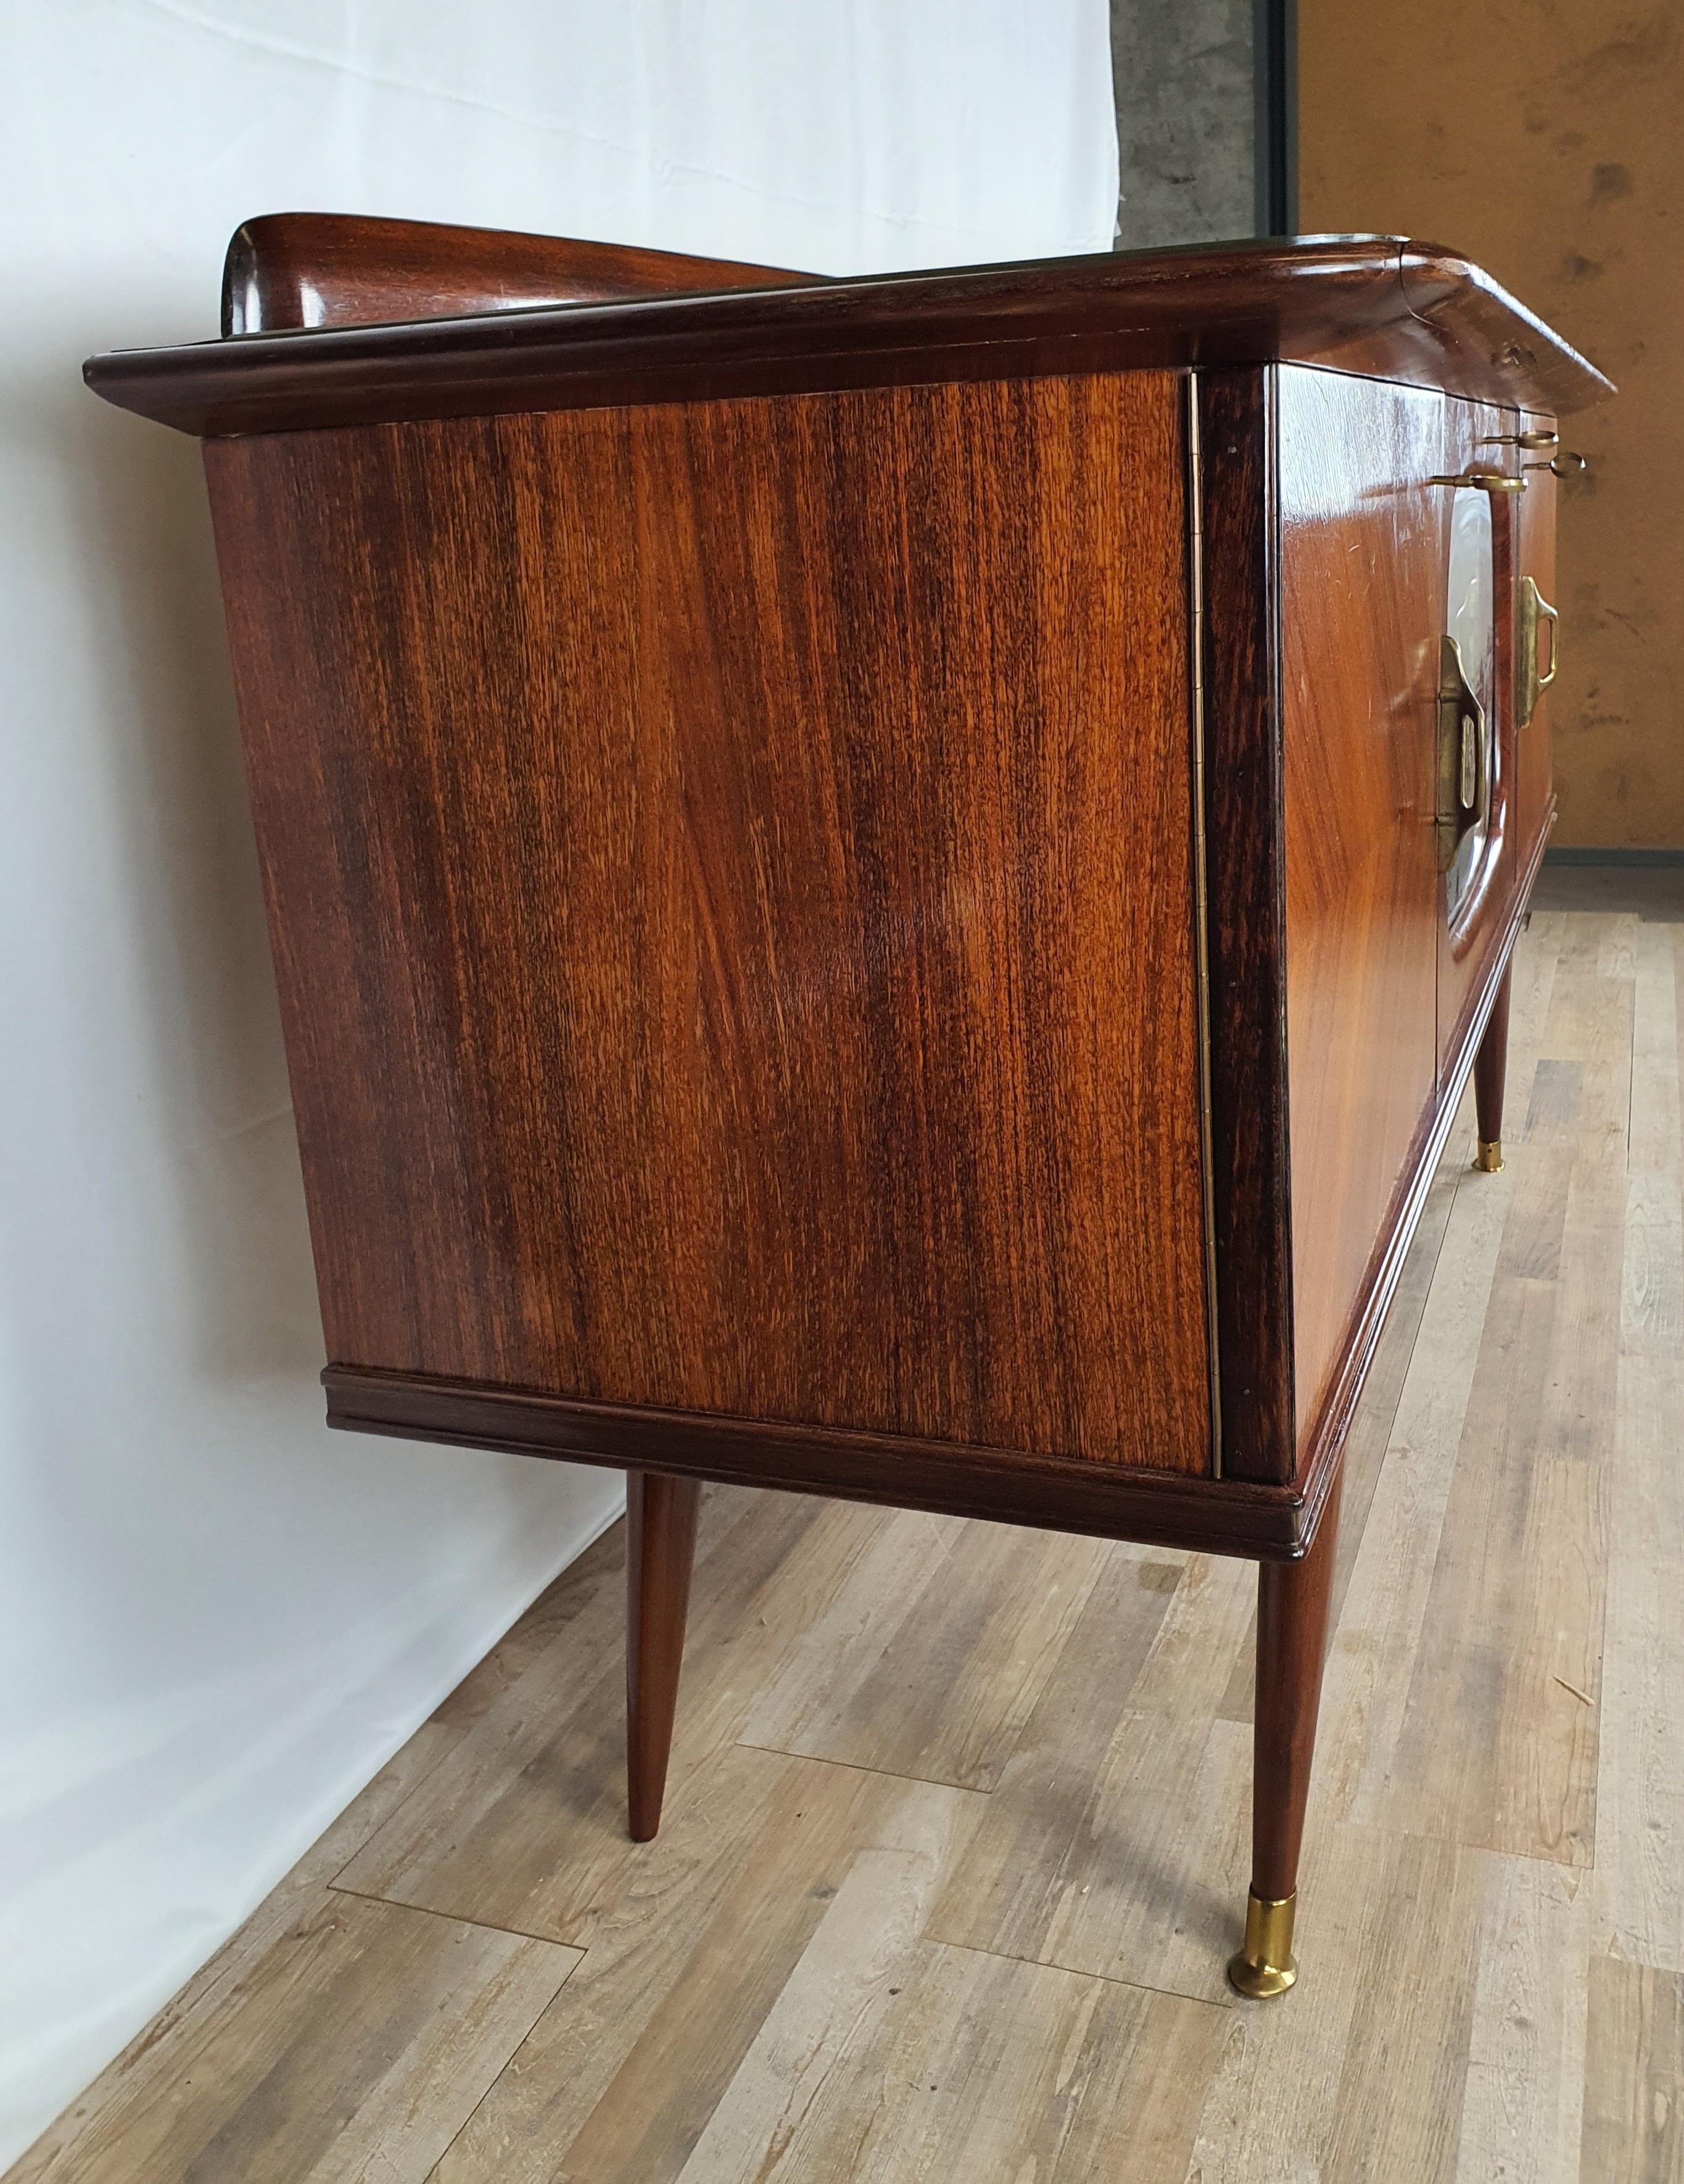 Elegant early 1950s hall or living room sideboard in walnut with brass details and a flap with bar area in the centre.

It is a piece of furniture with a Vintage Design but at the same time with a touch of modernity given by the sinuous and soft